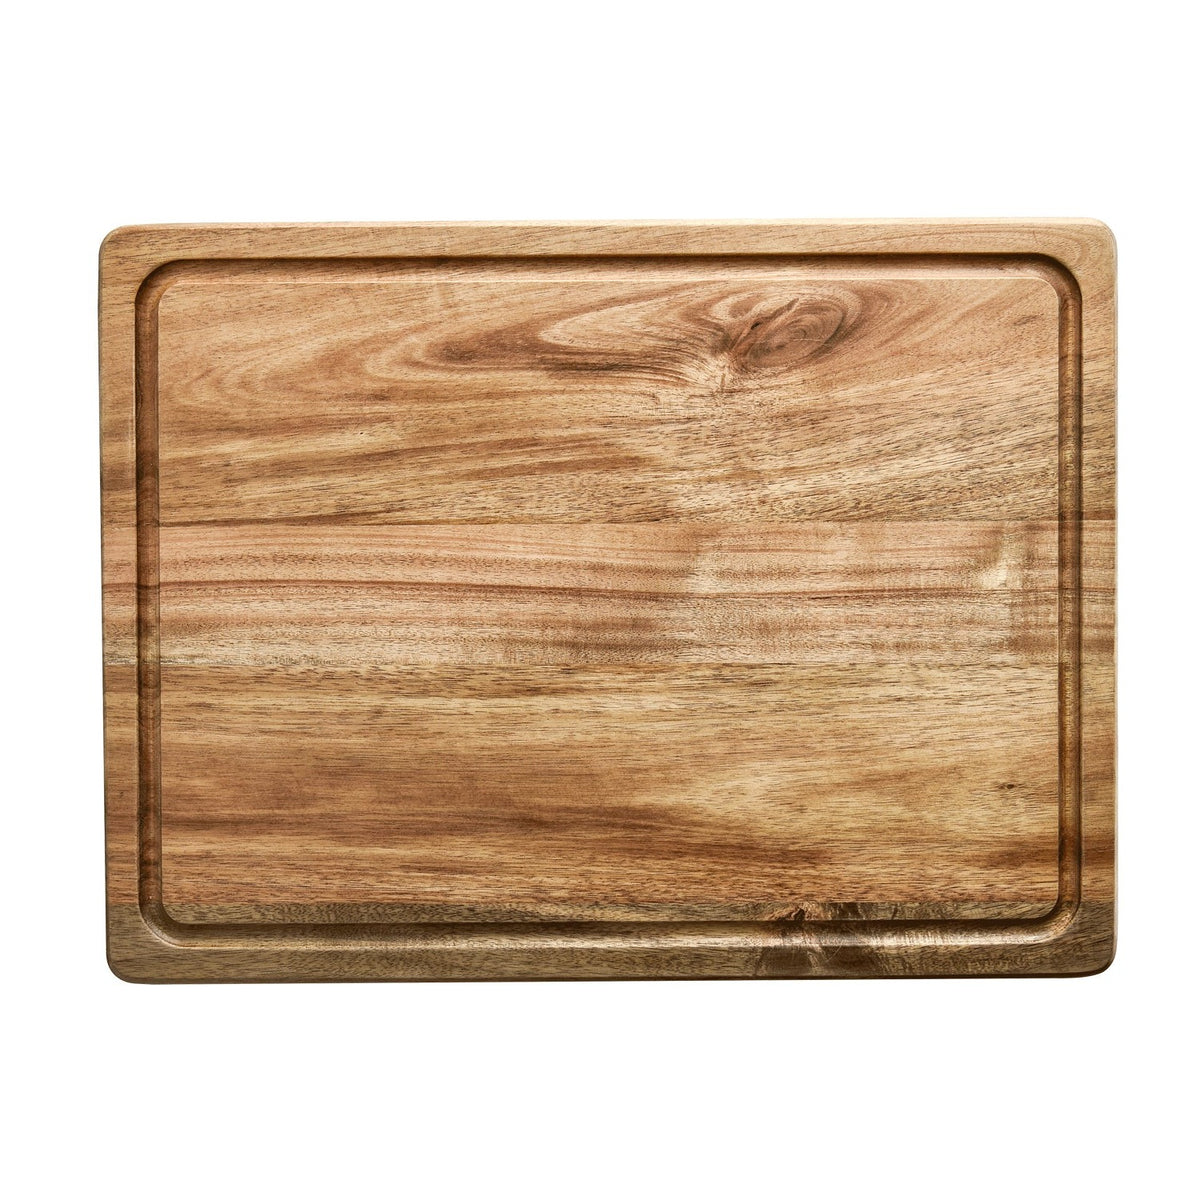  Large Acacia Wood Cutting Board for Kitchen - Caperci Better Chopping  Board with Juice Groove & Handle Hole for Meat (Butcher Block) Vegetables  and Cheese, 18 x 12 Inch: Home & Kitchen